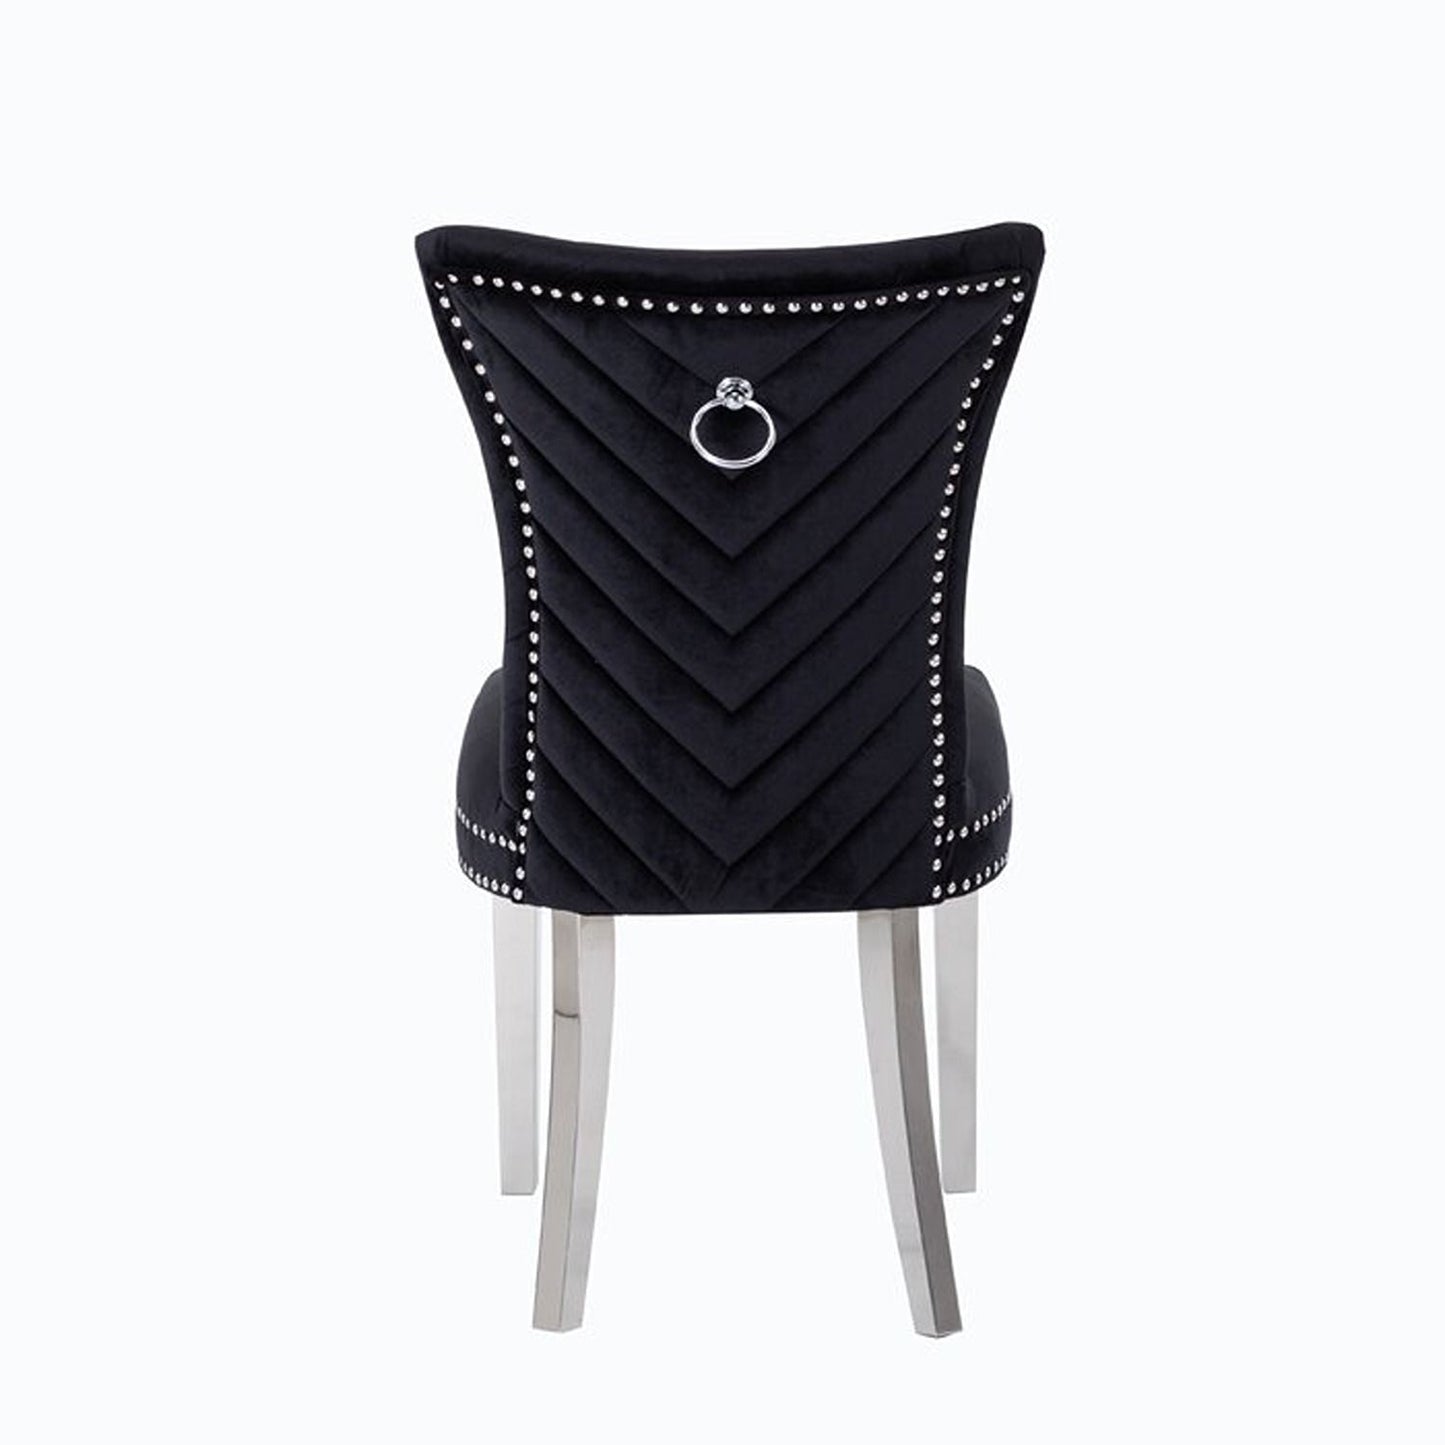 Eva 2 Piece Gold Legs Dining Chairs Finished with Black Fabric